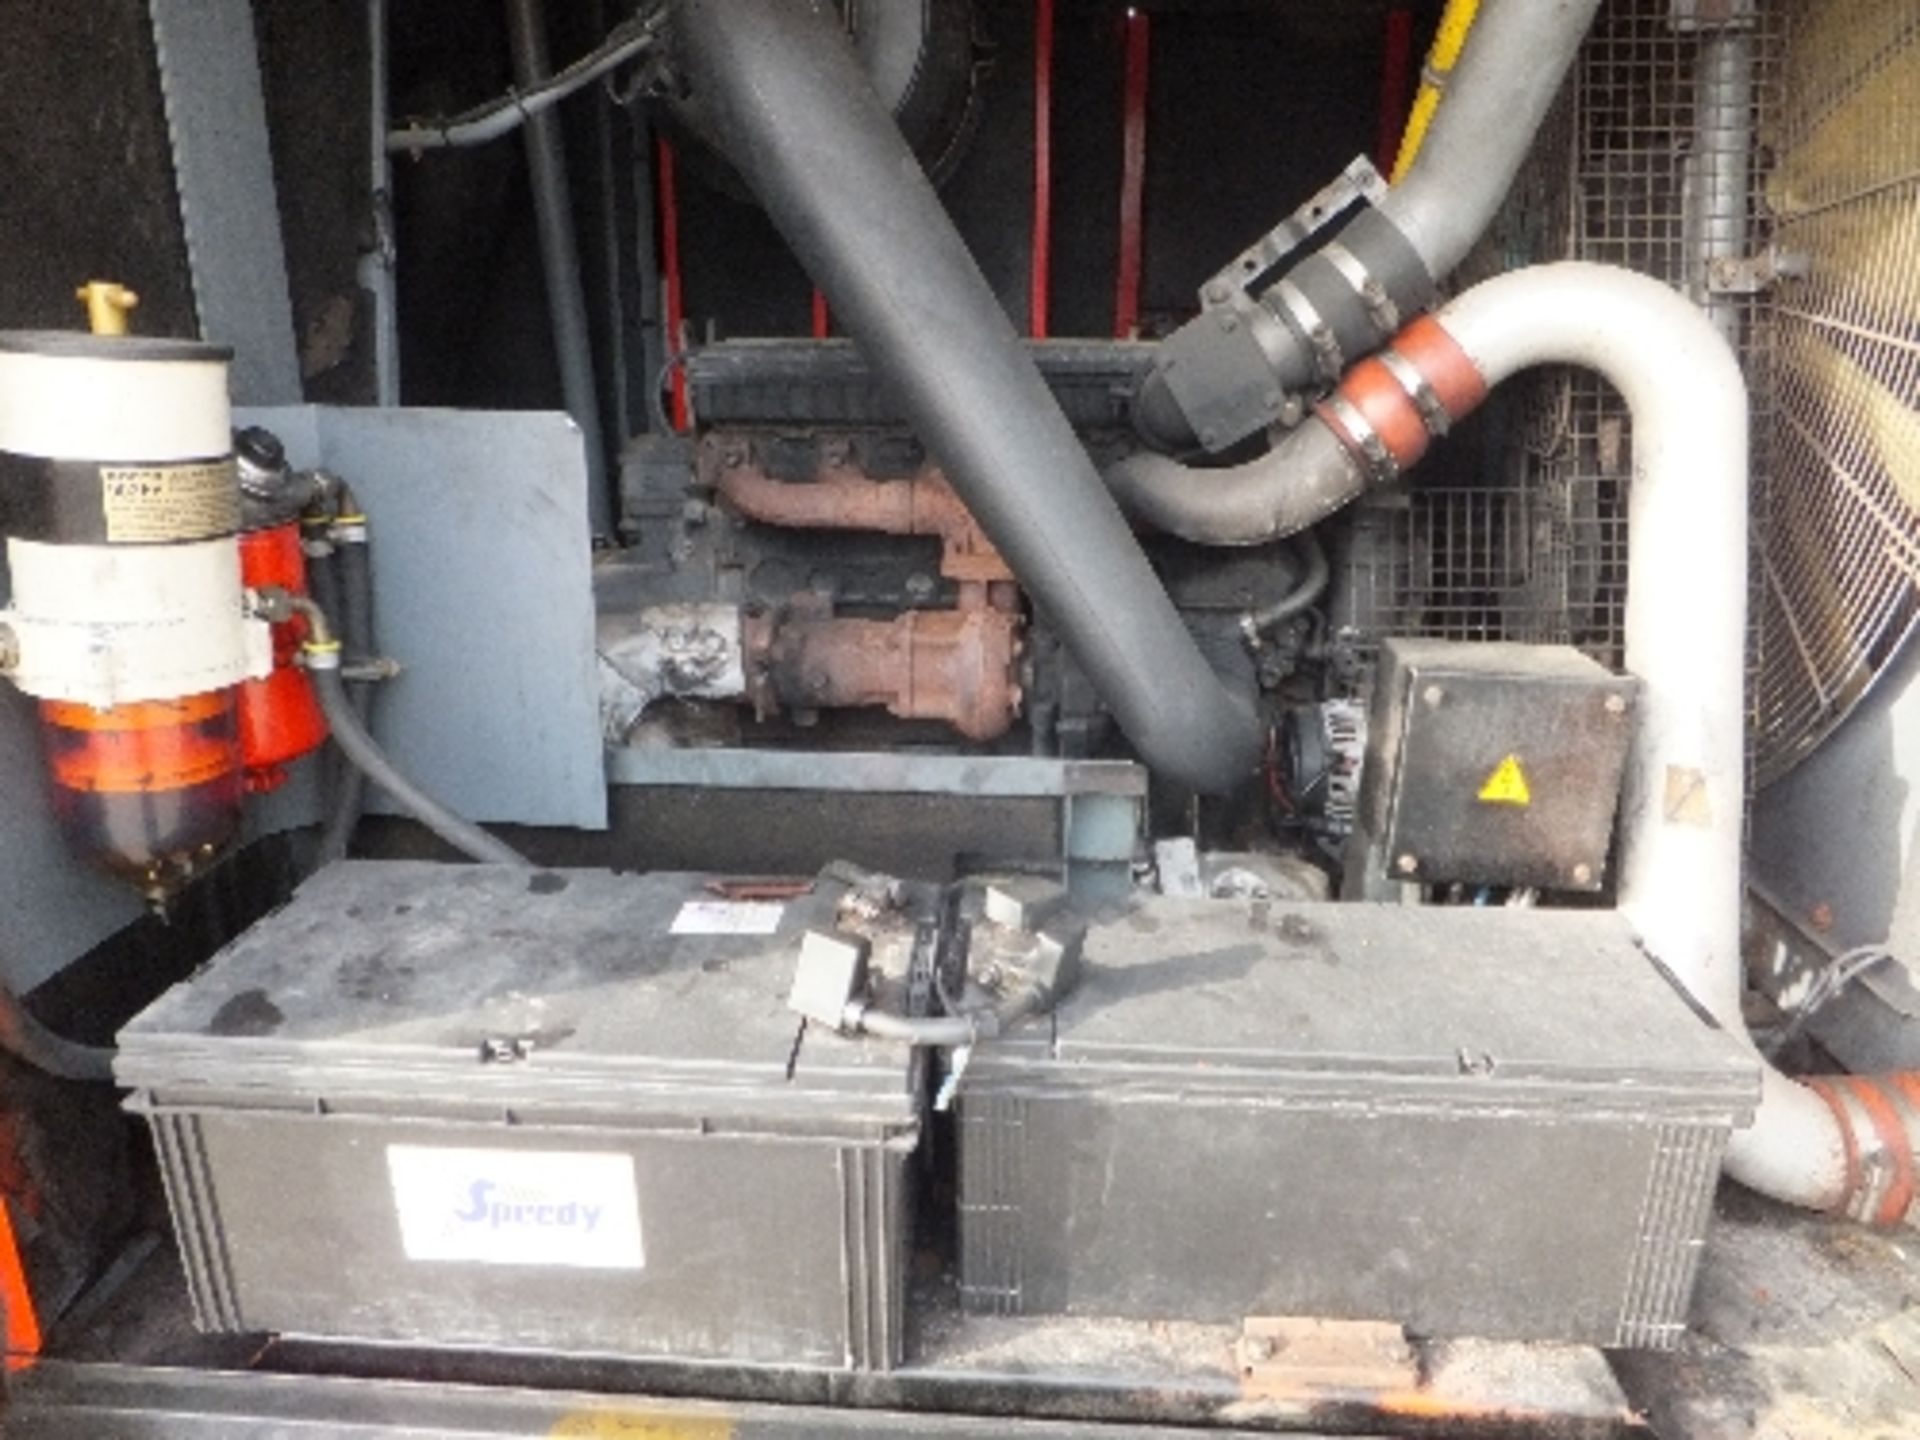 Atlas Copco XAHS 416 compressor (2005) Turns over, common rail fuel issue - Image 2 of 11